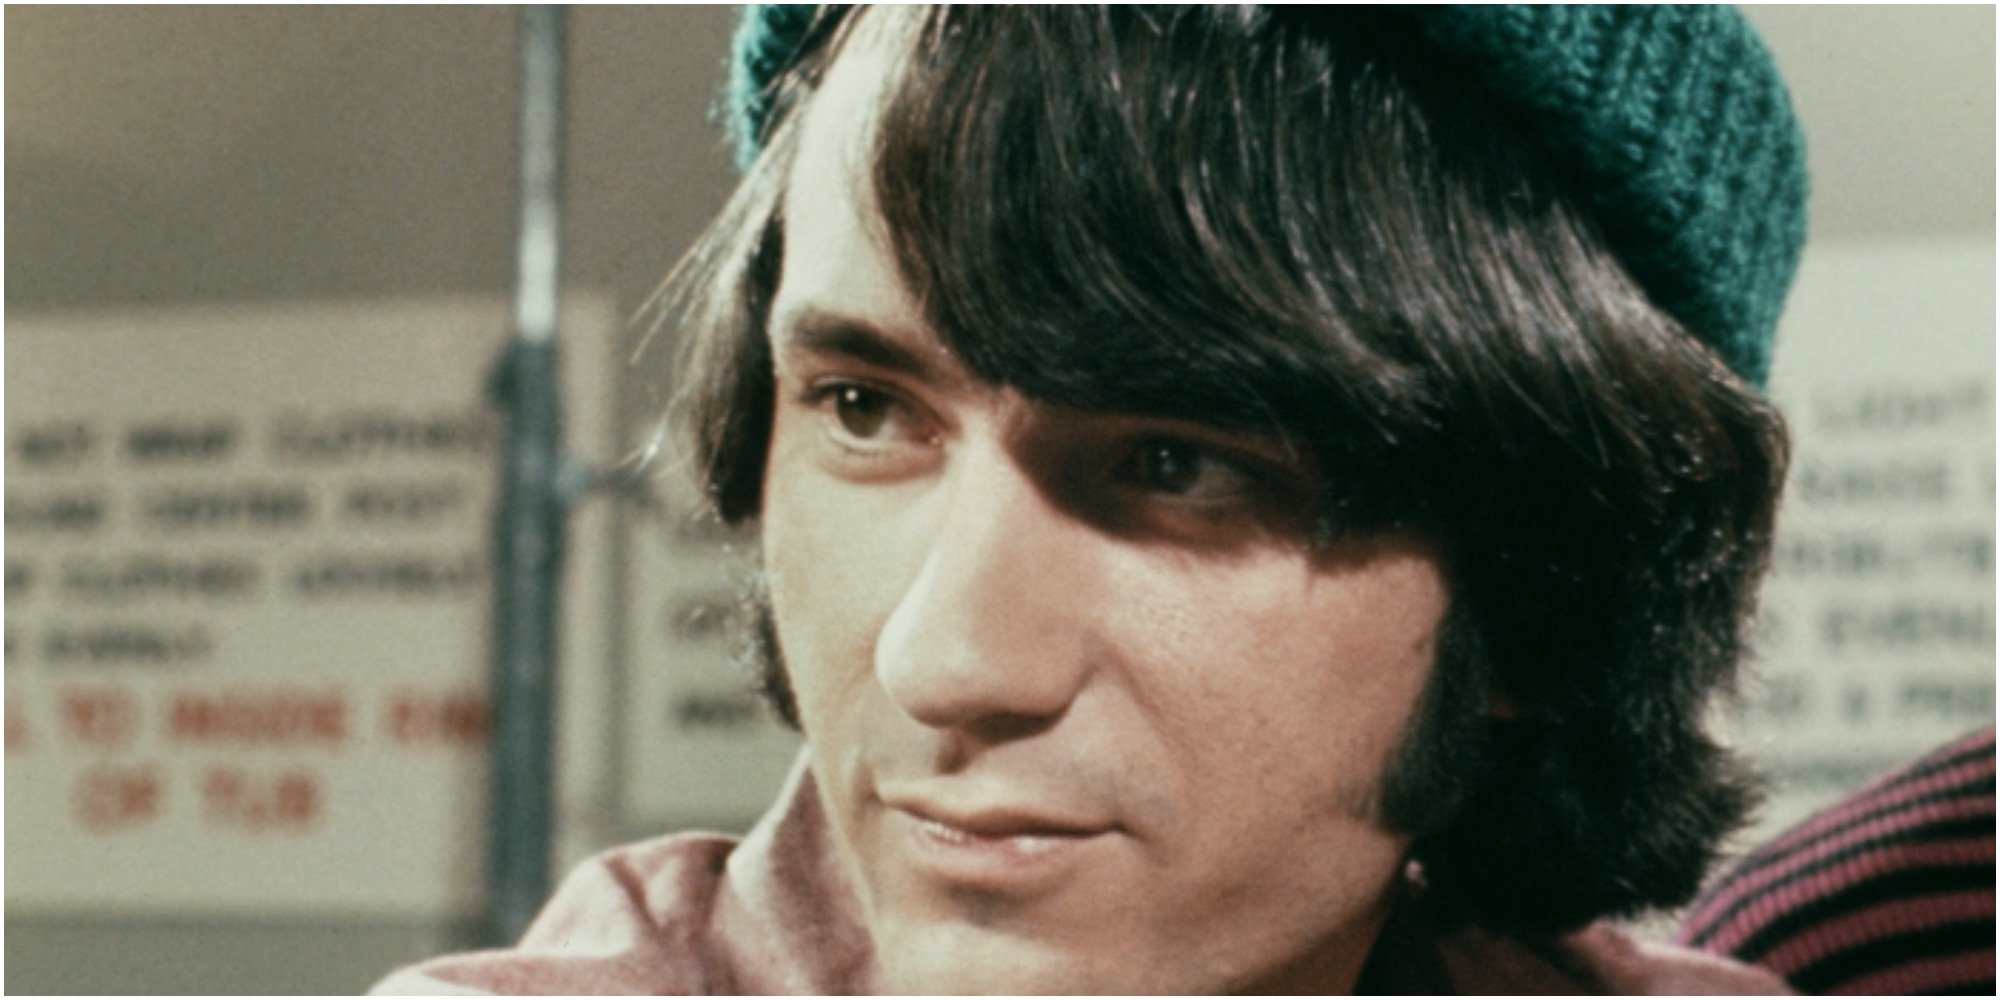 Mike Nesmith wears his green hat on the set of The Monkees.